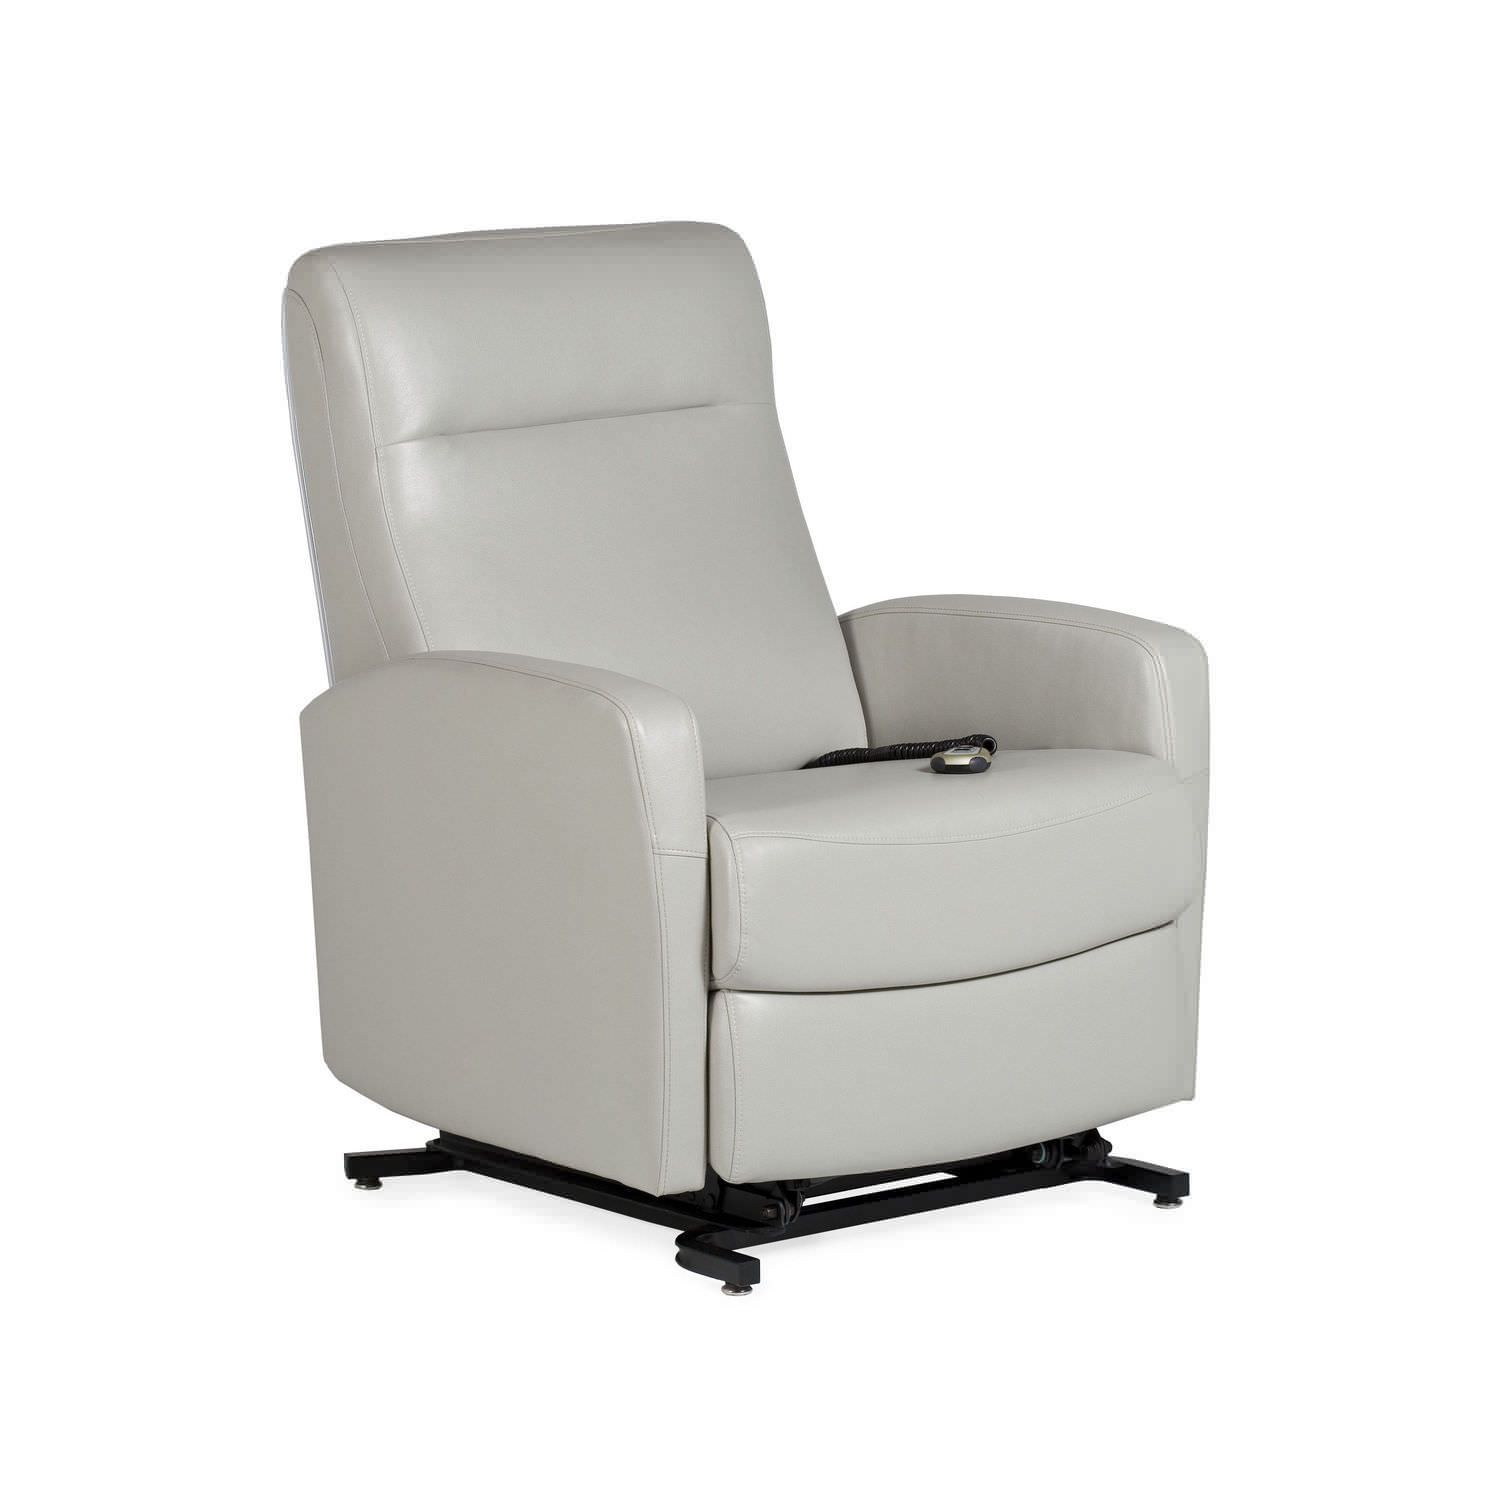 Reclining medical sleeper chair / lifting / with legrest / electrical K-Komfort K9P04 Knú Healthcare